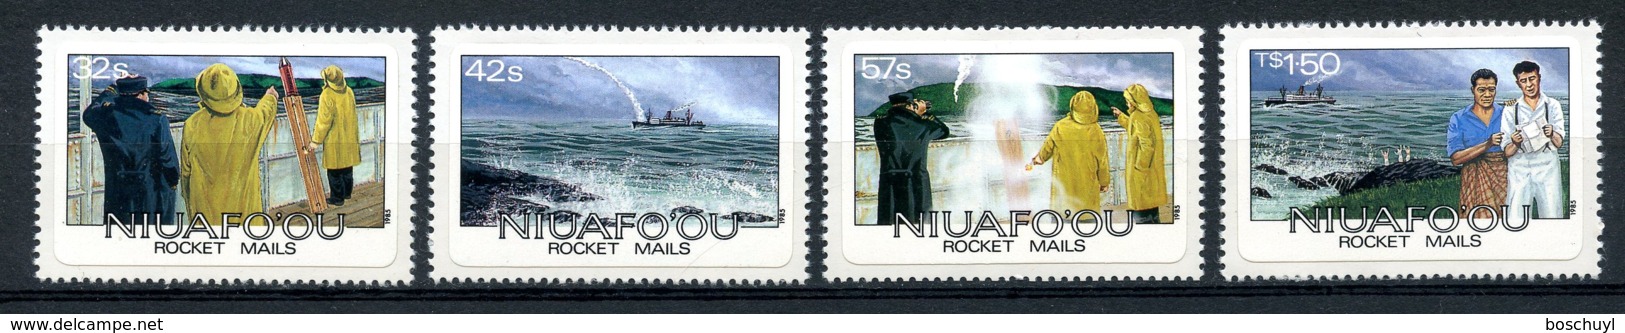 Niuafo'ou, Tin Can Island, 1985, Rocket Mail, Boats, MNH, Michel 61-64 - Oceania (Other)